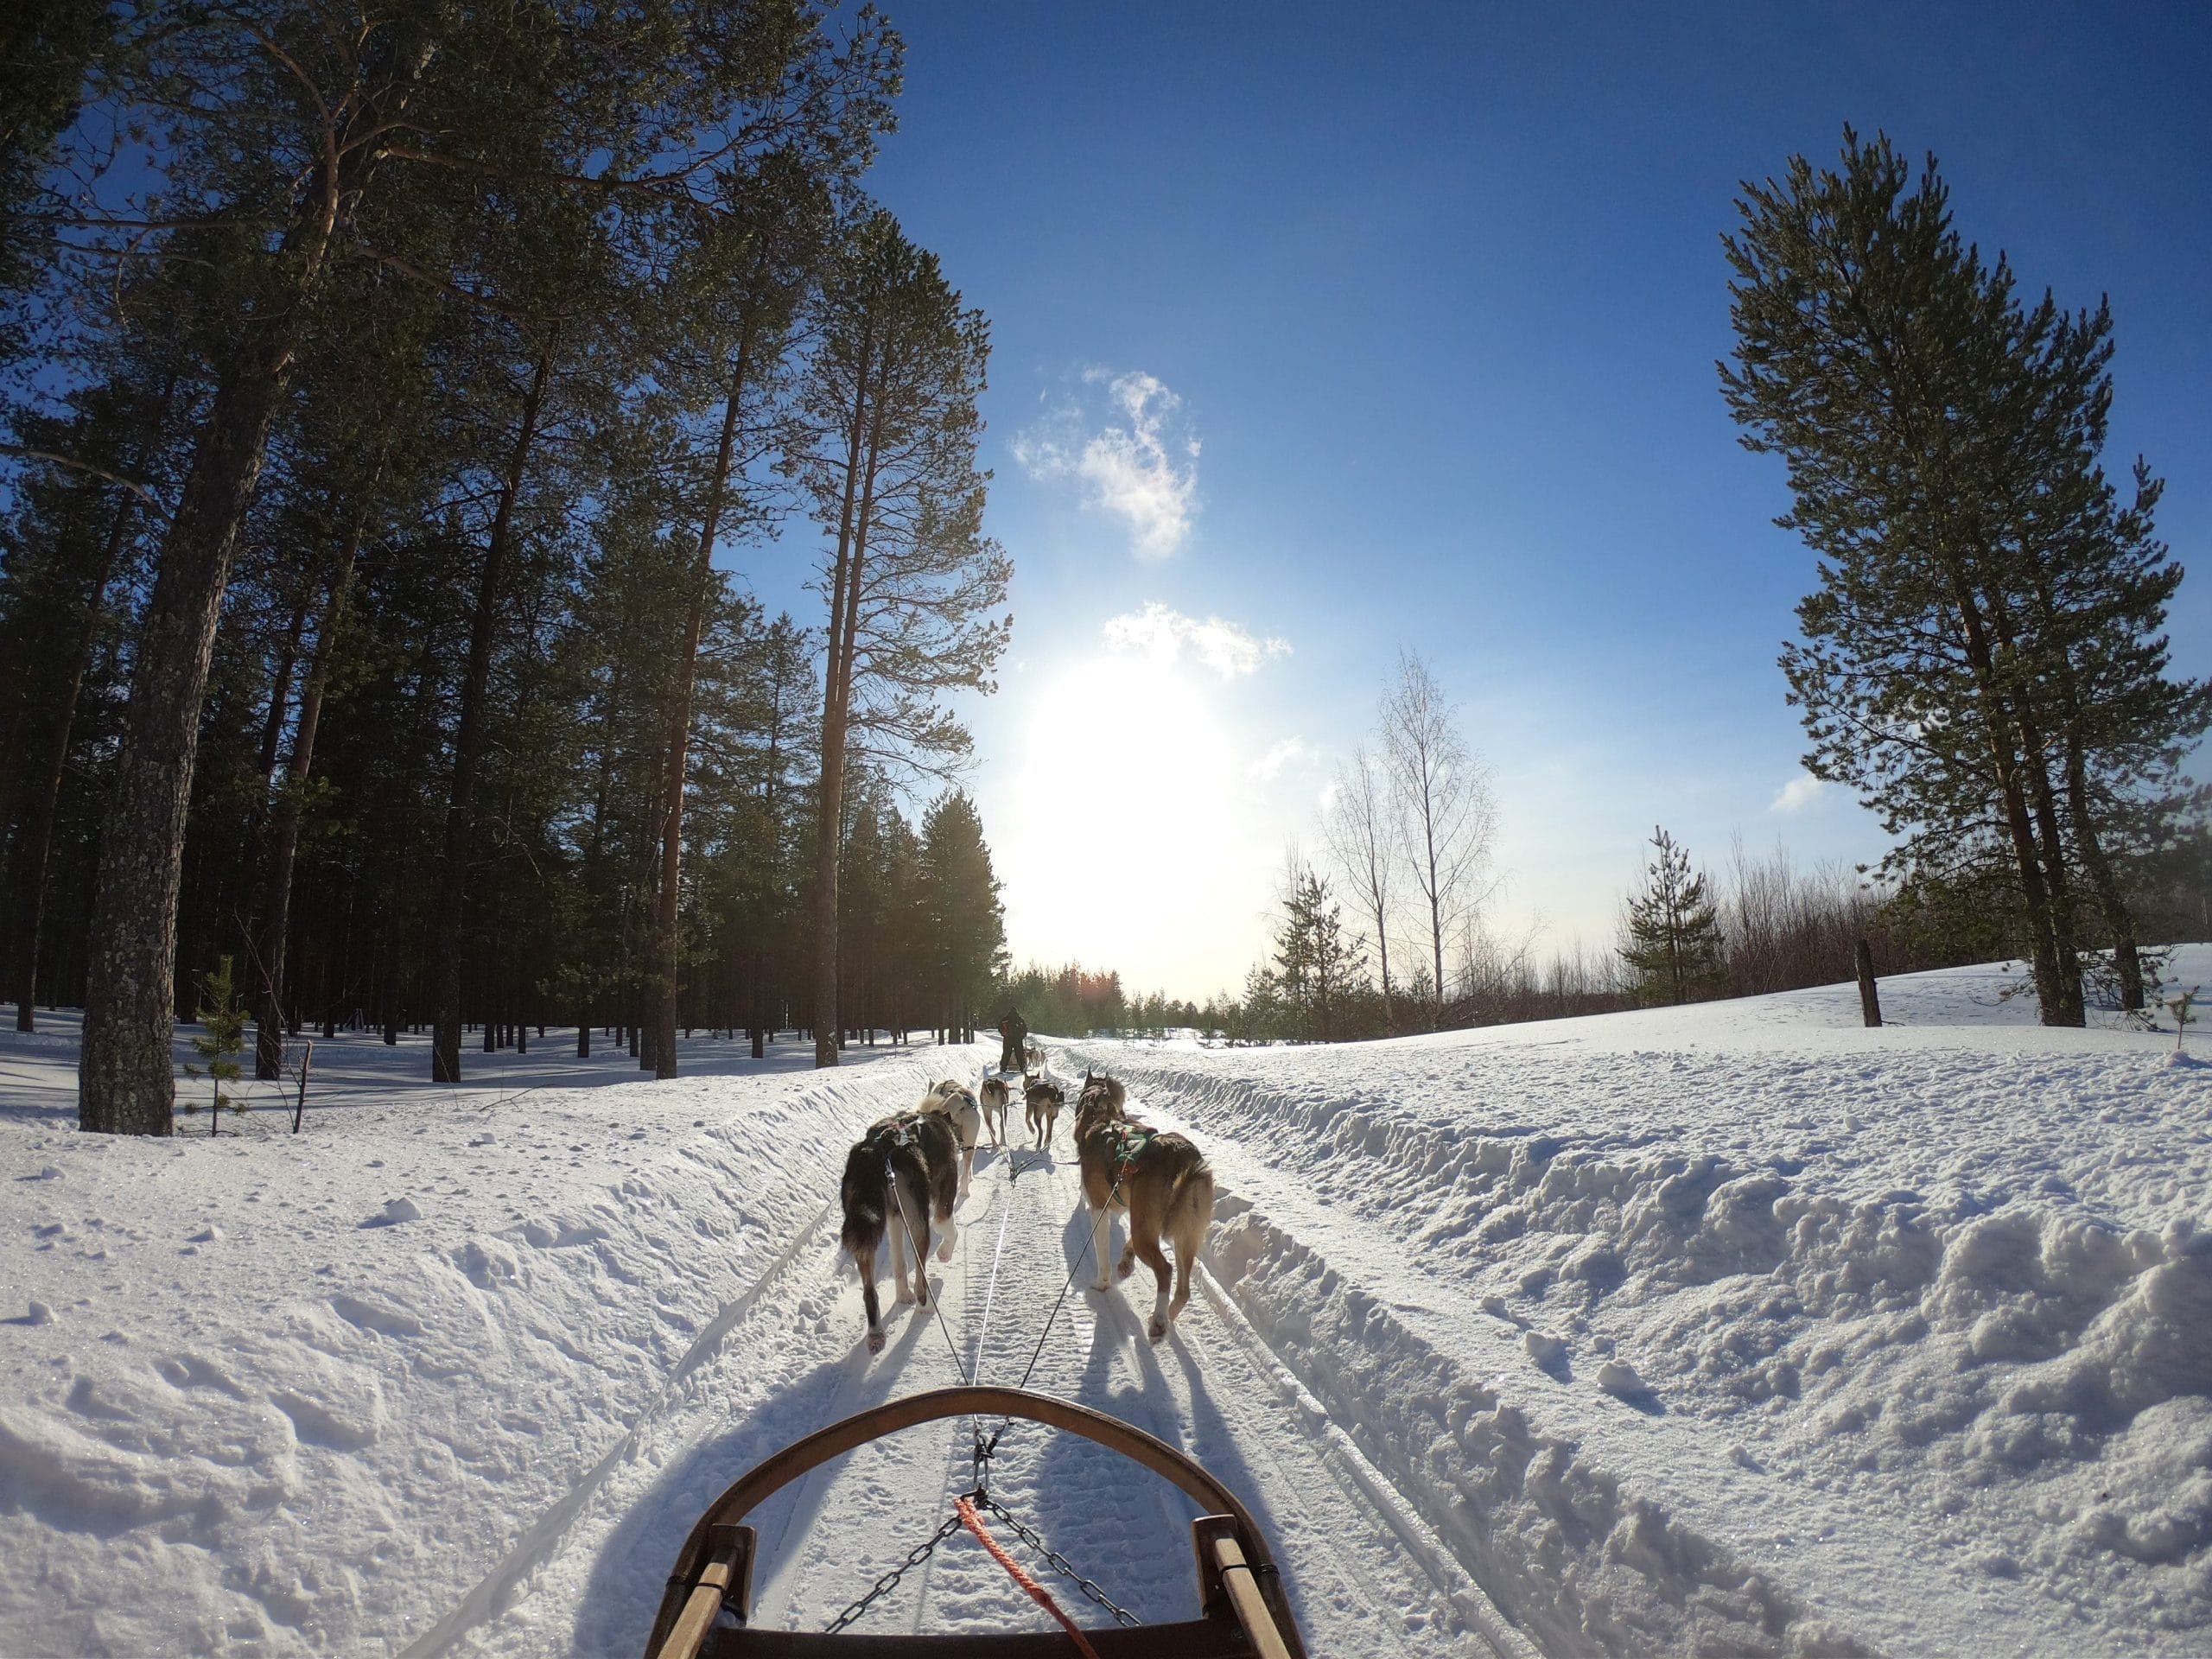 Sled Dog Day: A Tribute to Their Strength and Loyalty